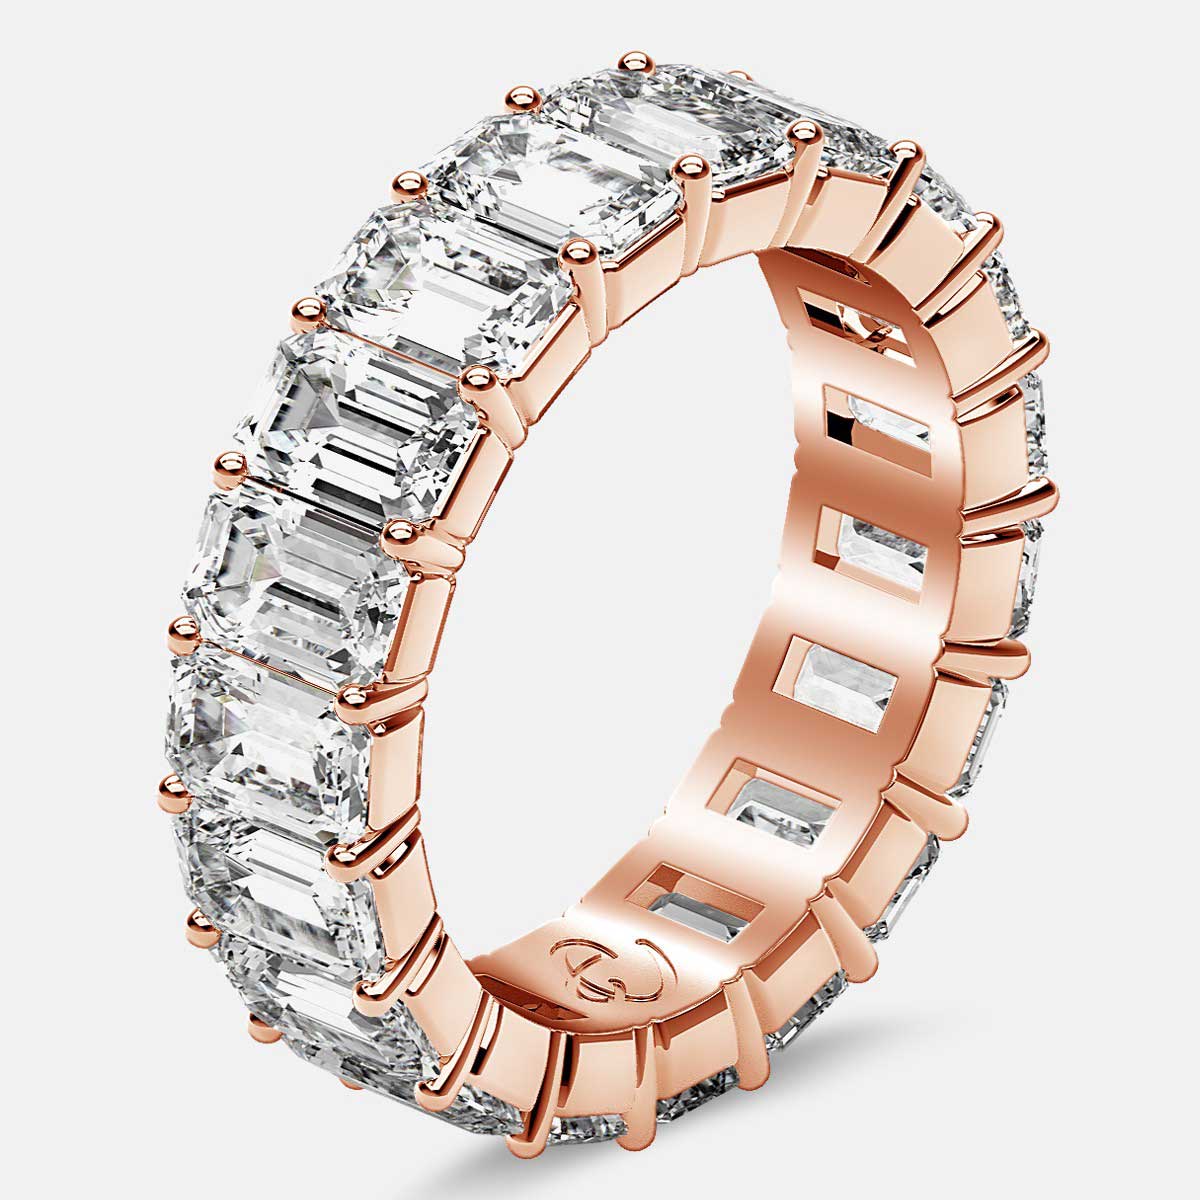 Classic Eternity Ring with Emerald Cut Diamonds in 18k Rose Gold